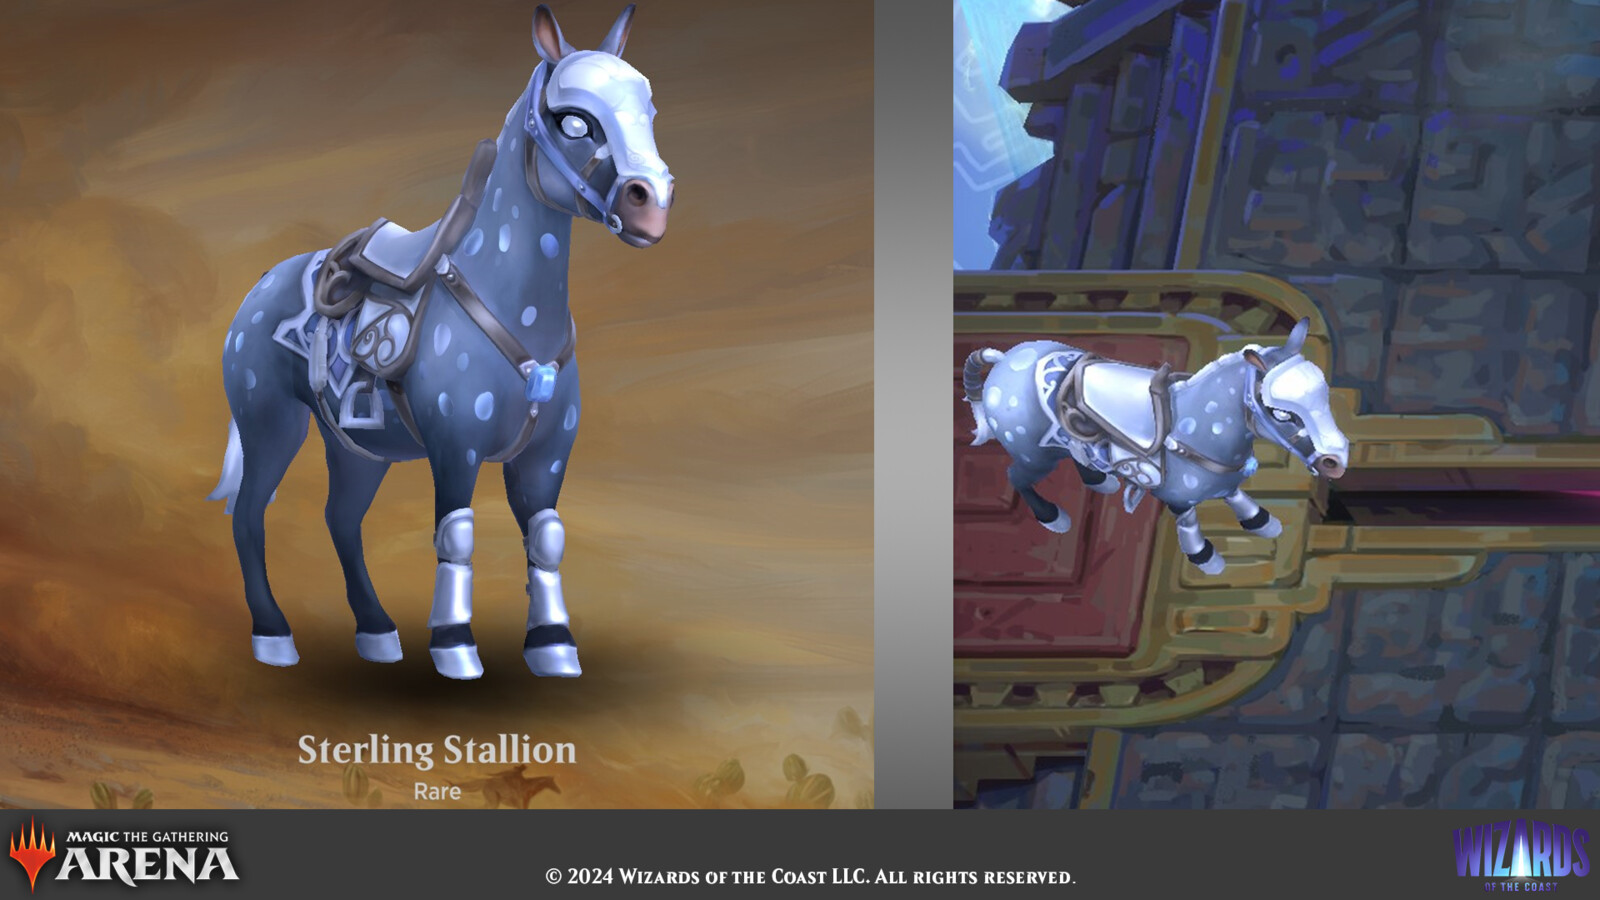 Select companion and game views for the Sterling Stallion